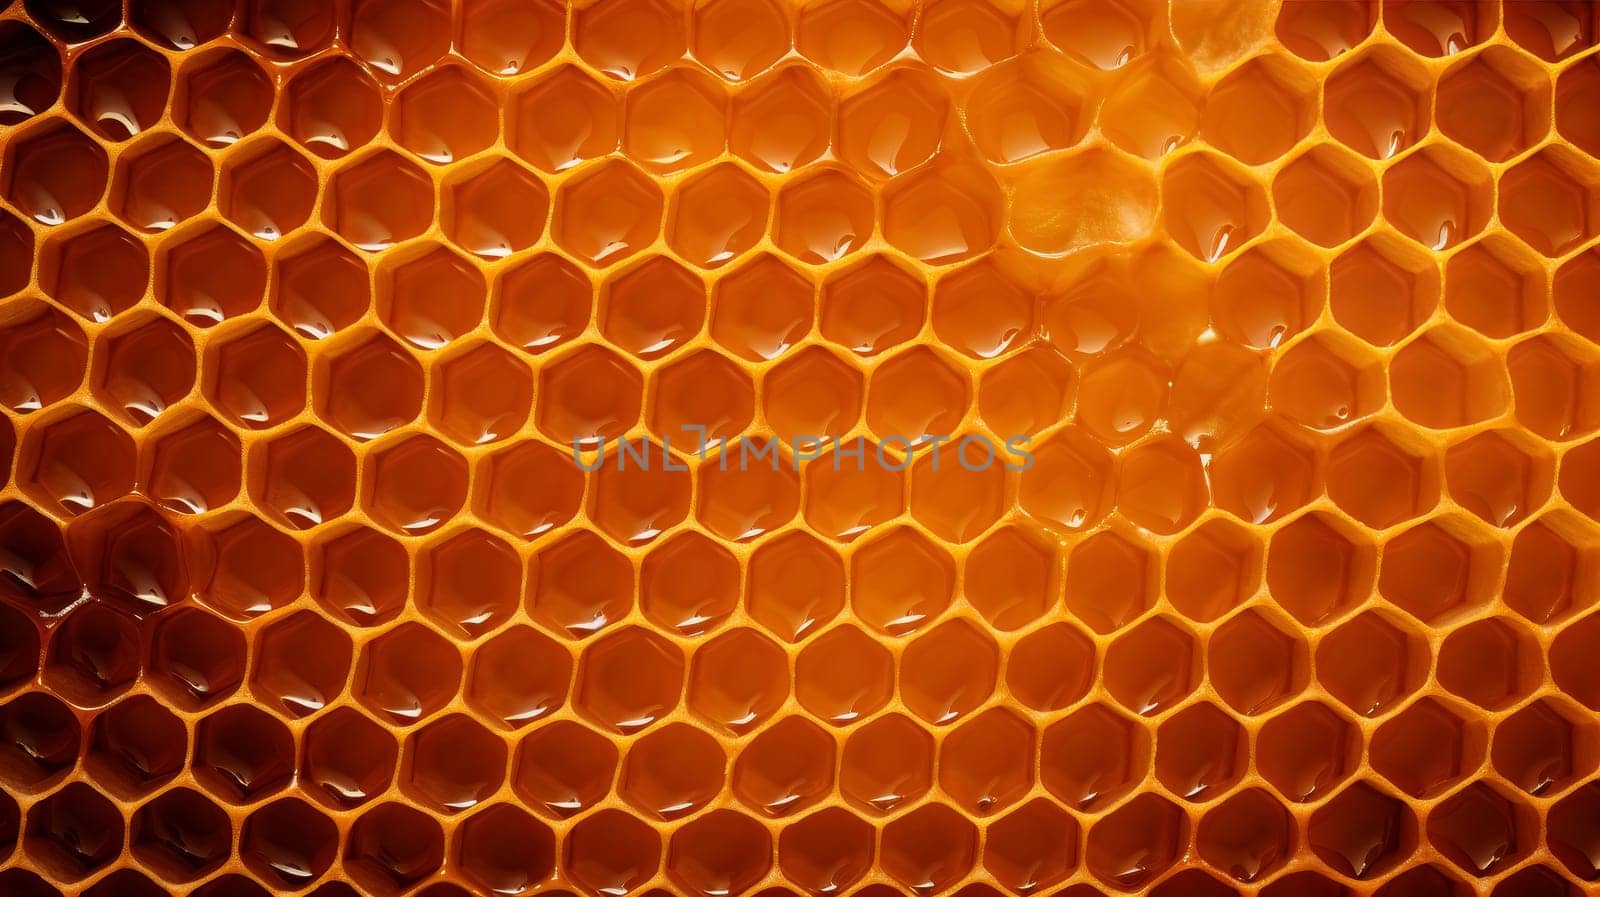 Close-up image of a honeycomb, golden honey filling the hexagonal shapes with natural sweetness.